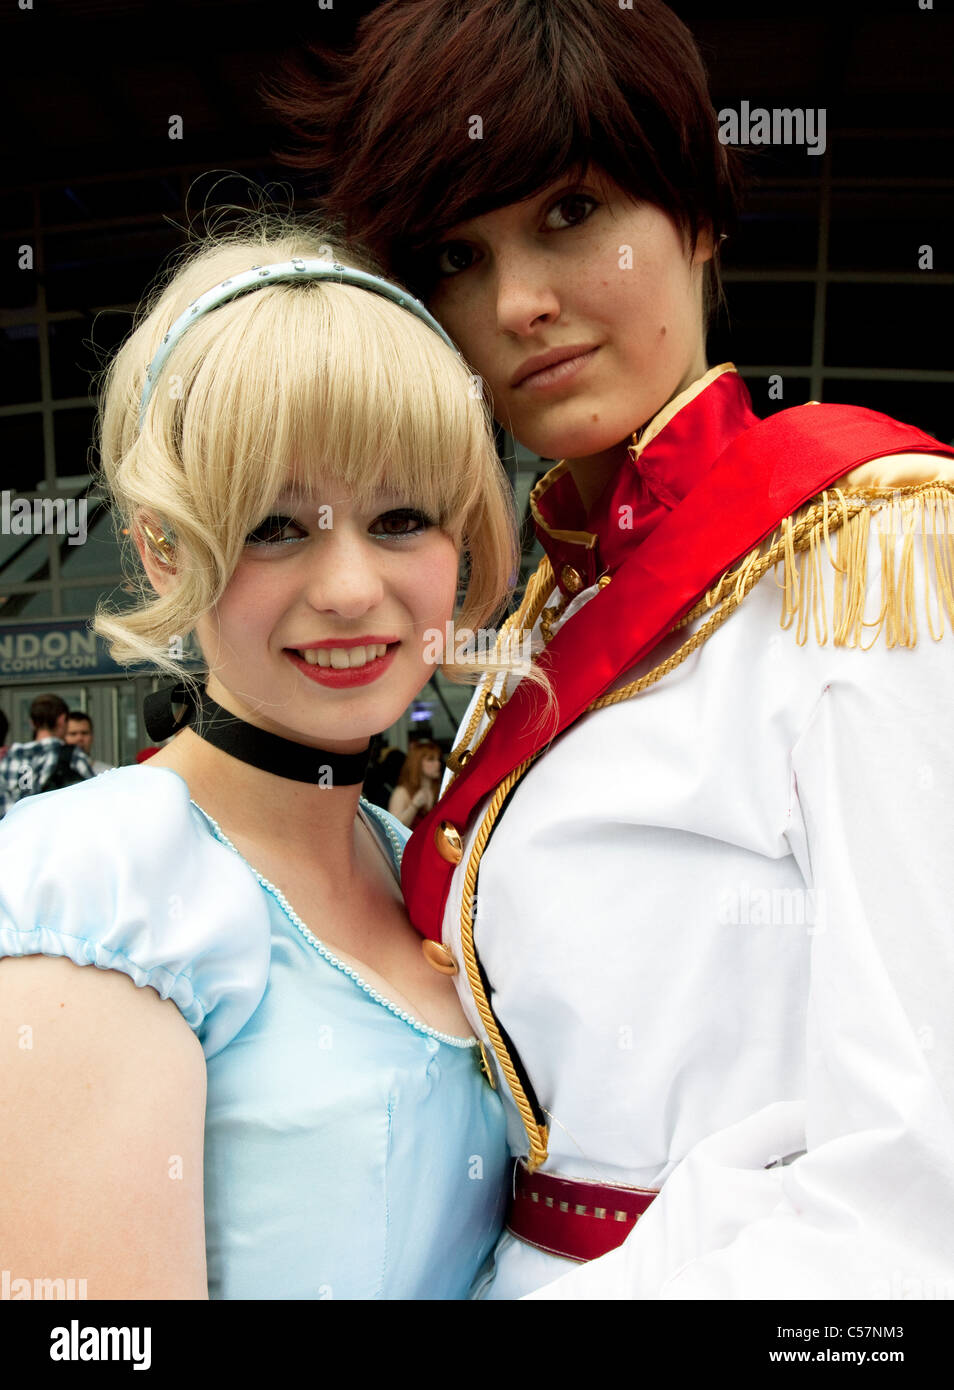 London Film & Comic Con 2011: Florence Roseberry-Haynes as Cinderella and Olivia Braddock as Prince Charming Disney characters Stock Photo